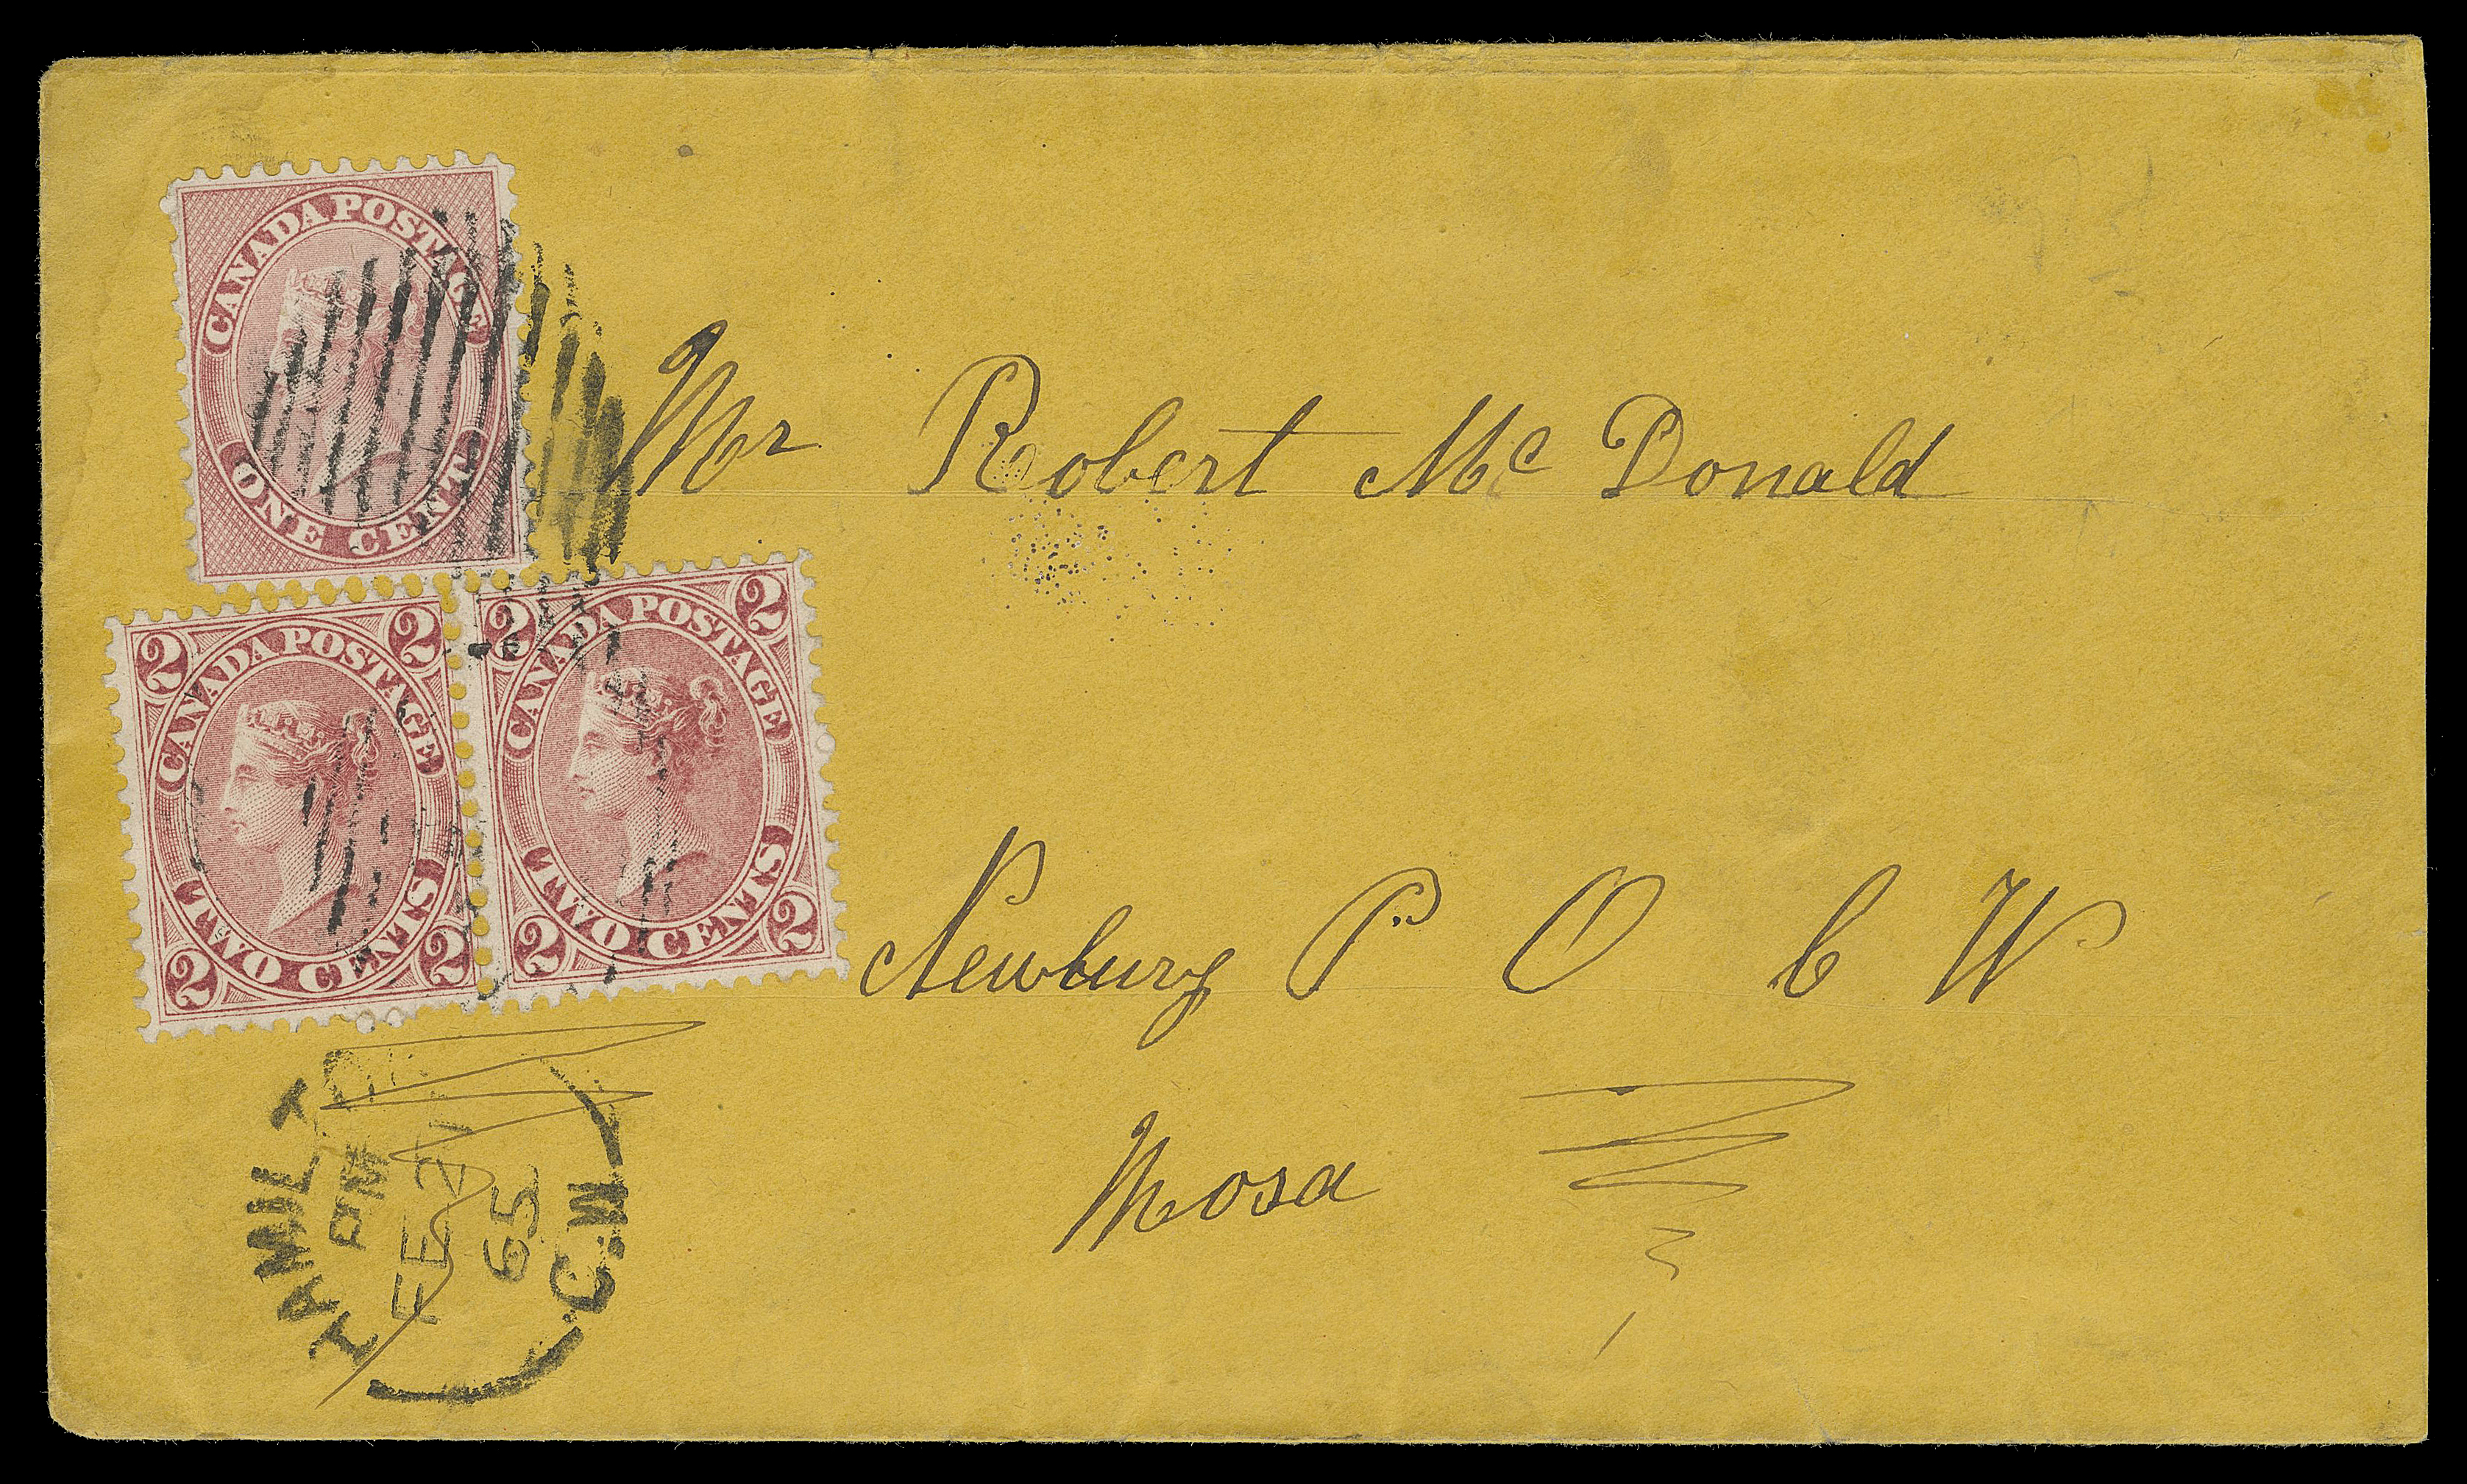 TWO CENTS  1865 (February 21) Orange cover of outstanding quality, bearing an equally superb franking of a very well centered 1c rose, perf 12x11¾ and a nicely centered pair of first printing 2c pale carmine red, perf 12x11¾, tied by Hamilton duplex, mailed to Newbury, C.W. with partial G.W.R. West FE 22 split ring RPO transit on back. Certainly among the finest existing covers bearing this elusive franking for the 5 cent domestic letter rate, XF (Unitrade 14viii, 20)

Provenance: Bill Lea Exhibit Collection of Canada Pence & Cents Postal History (private sale)
Sam Nickle, Christie